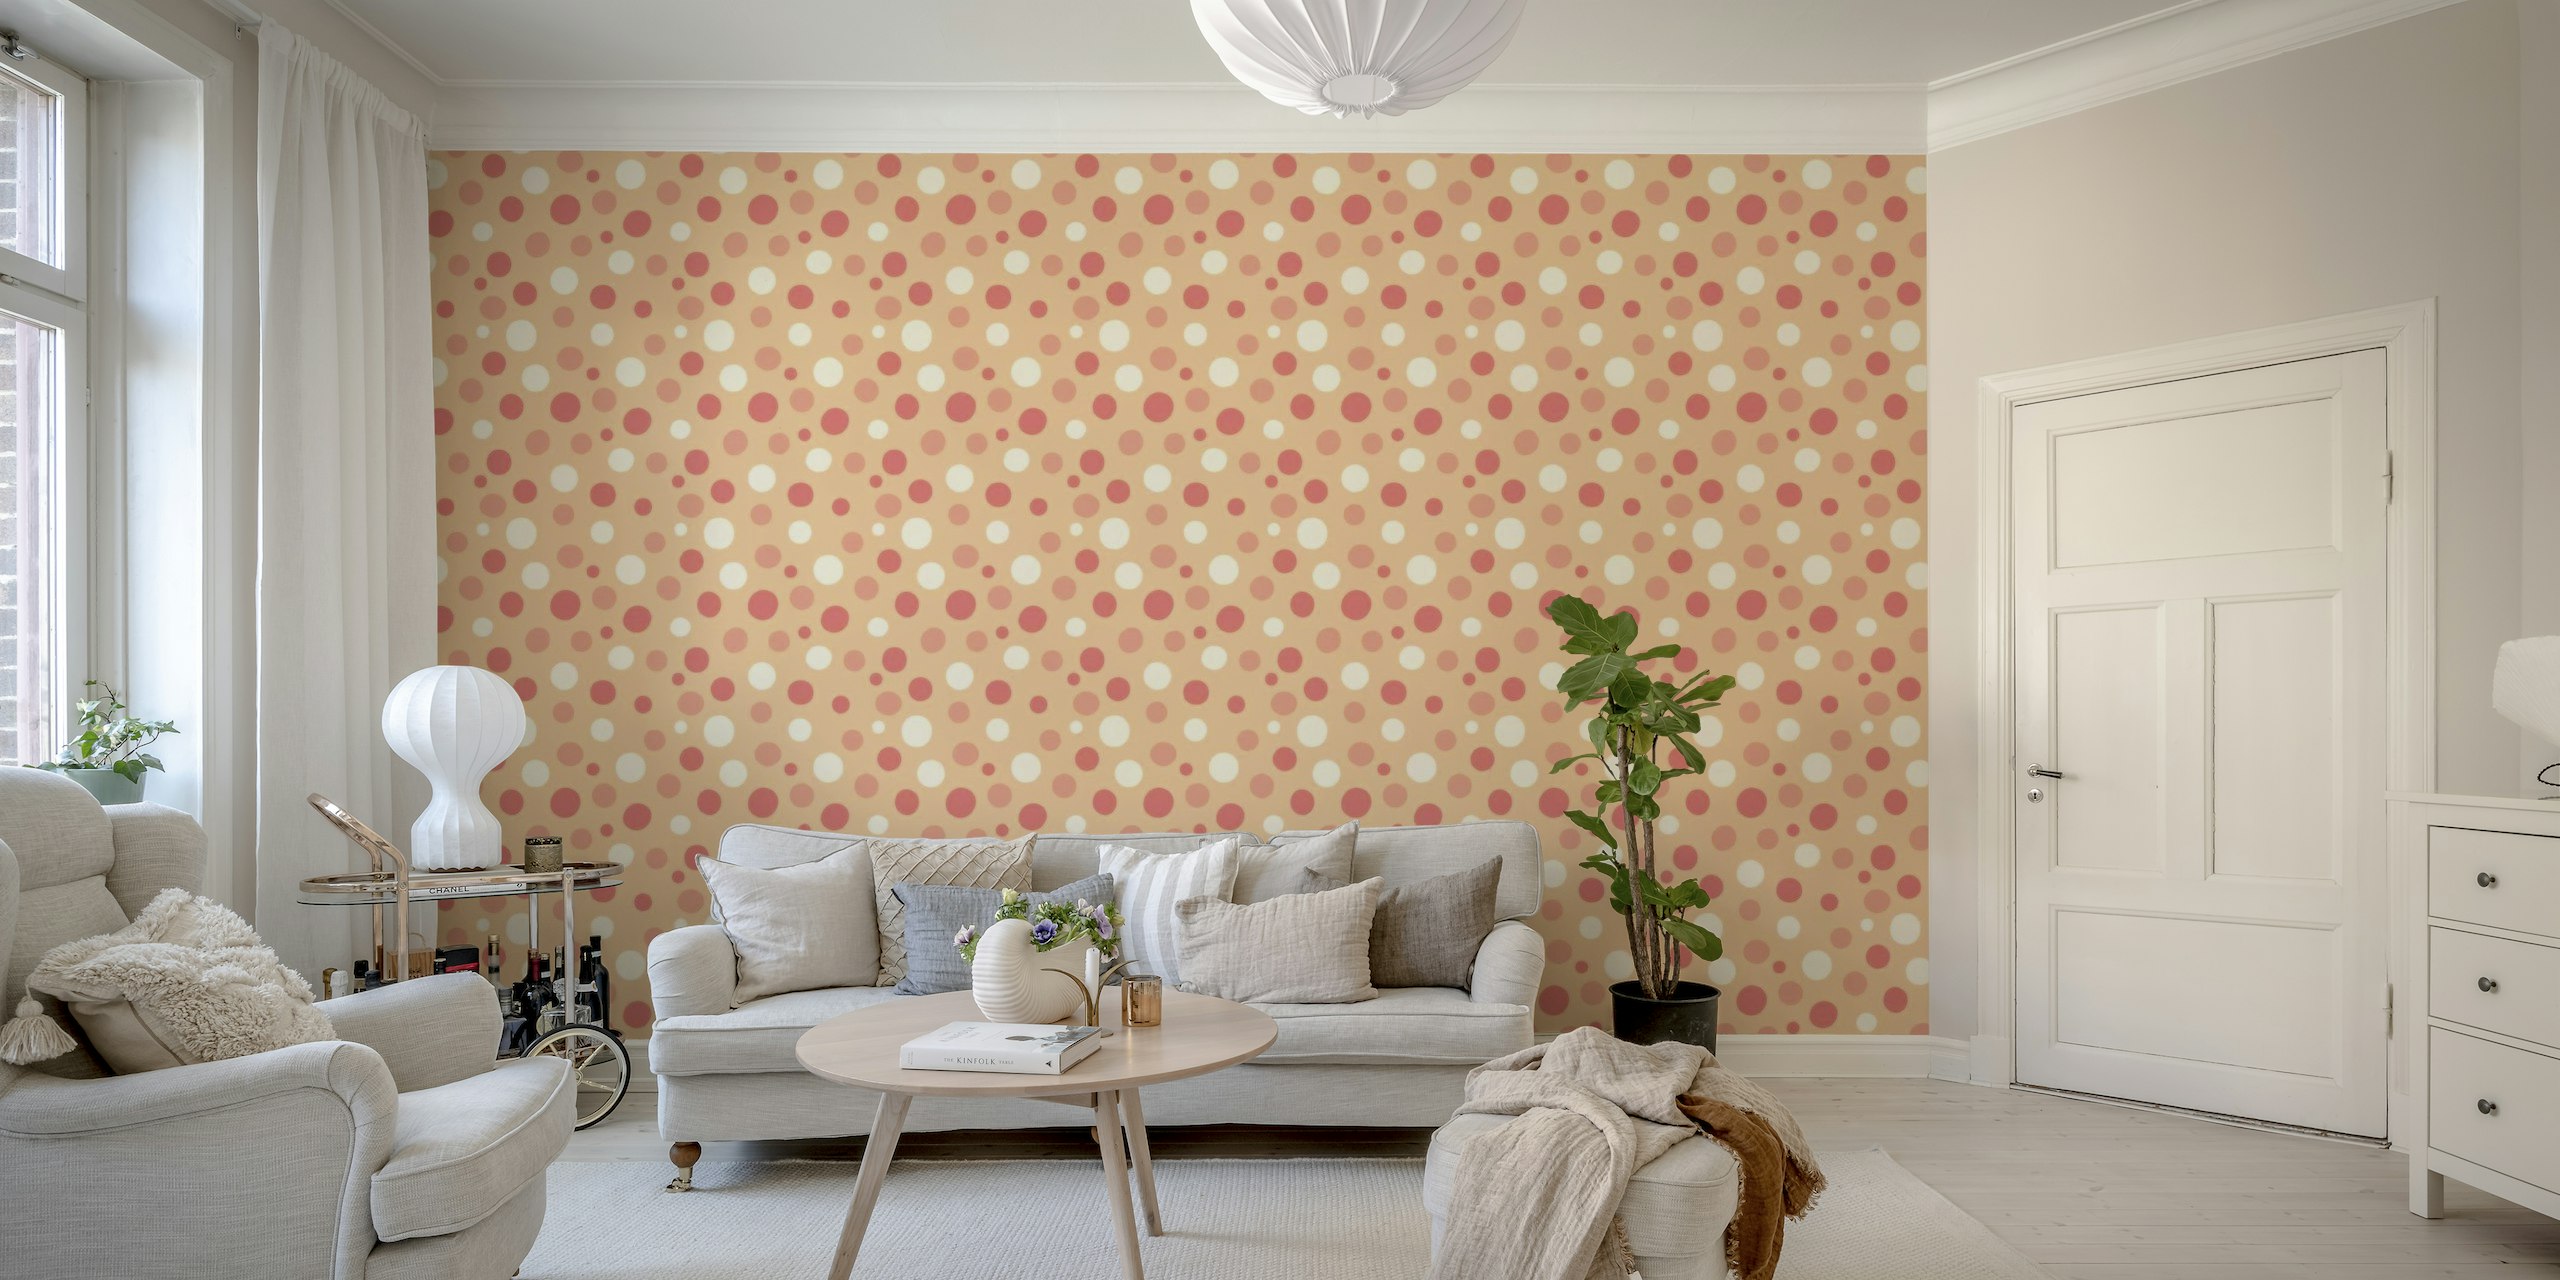 SCATTERED DOTS Simple Polka Dots - Peach Fuzz wallpaper